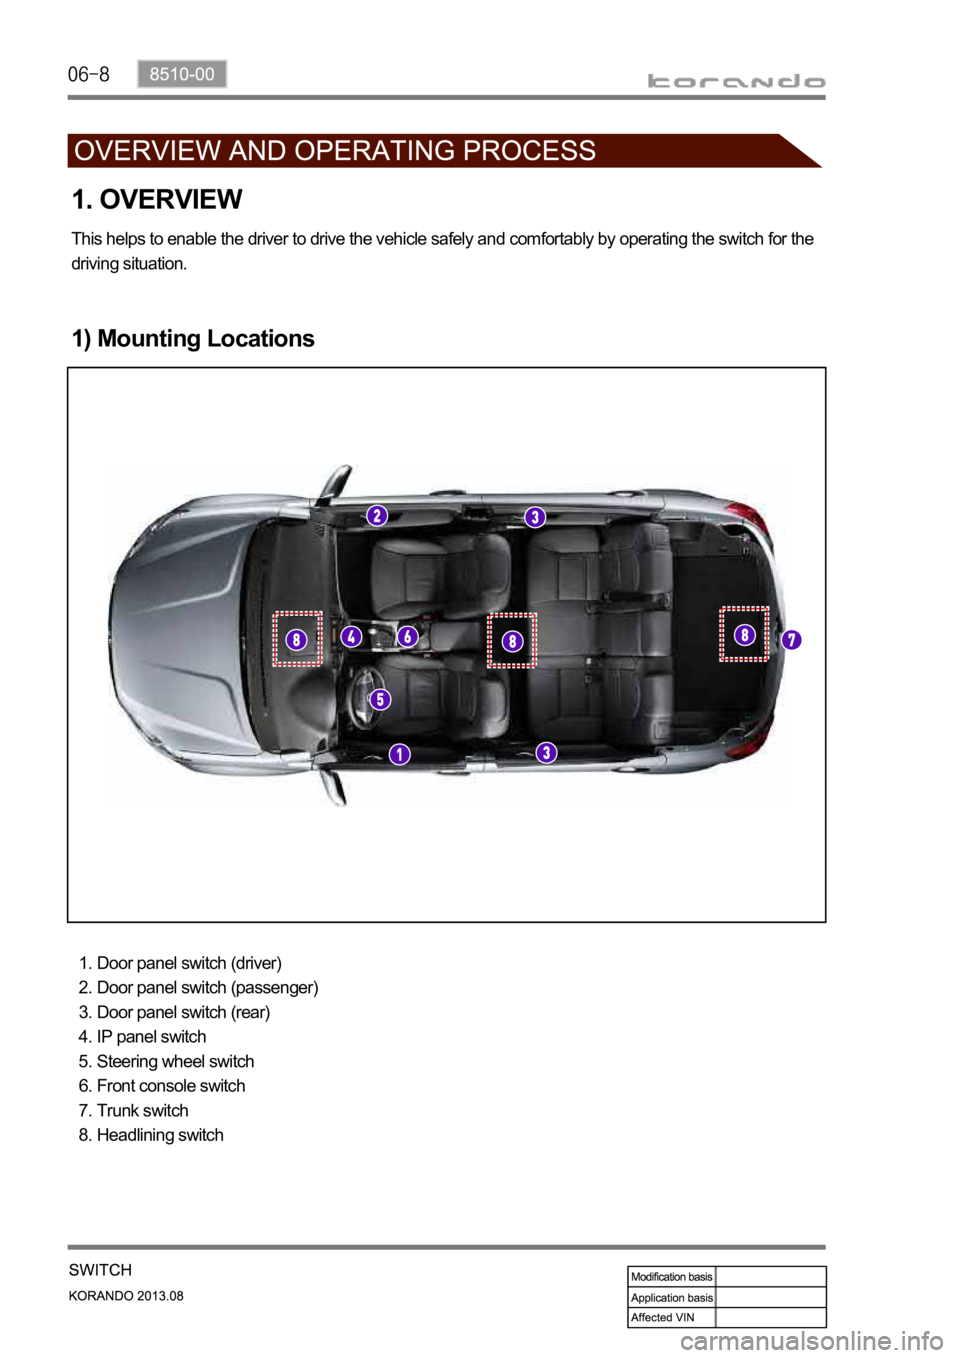 SSANGYONG KORANDO 2013  Service Manual 1. OVERVIEW
1) Mounting Locations
Door panel switch (driver)
Door panel switch (passenger)
Door panel switch (rear)
IP panel switch
Steering wheel switch
Front console switch
Trunk switch
Headlining s